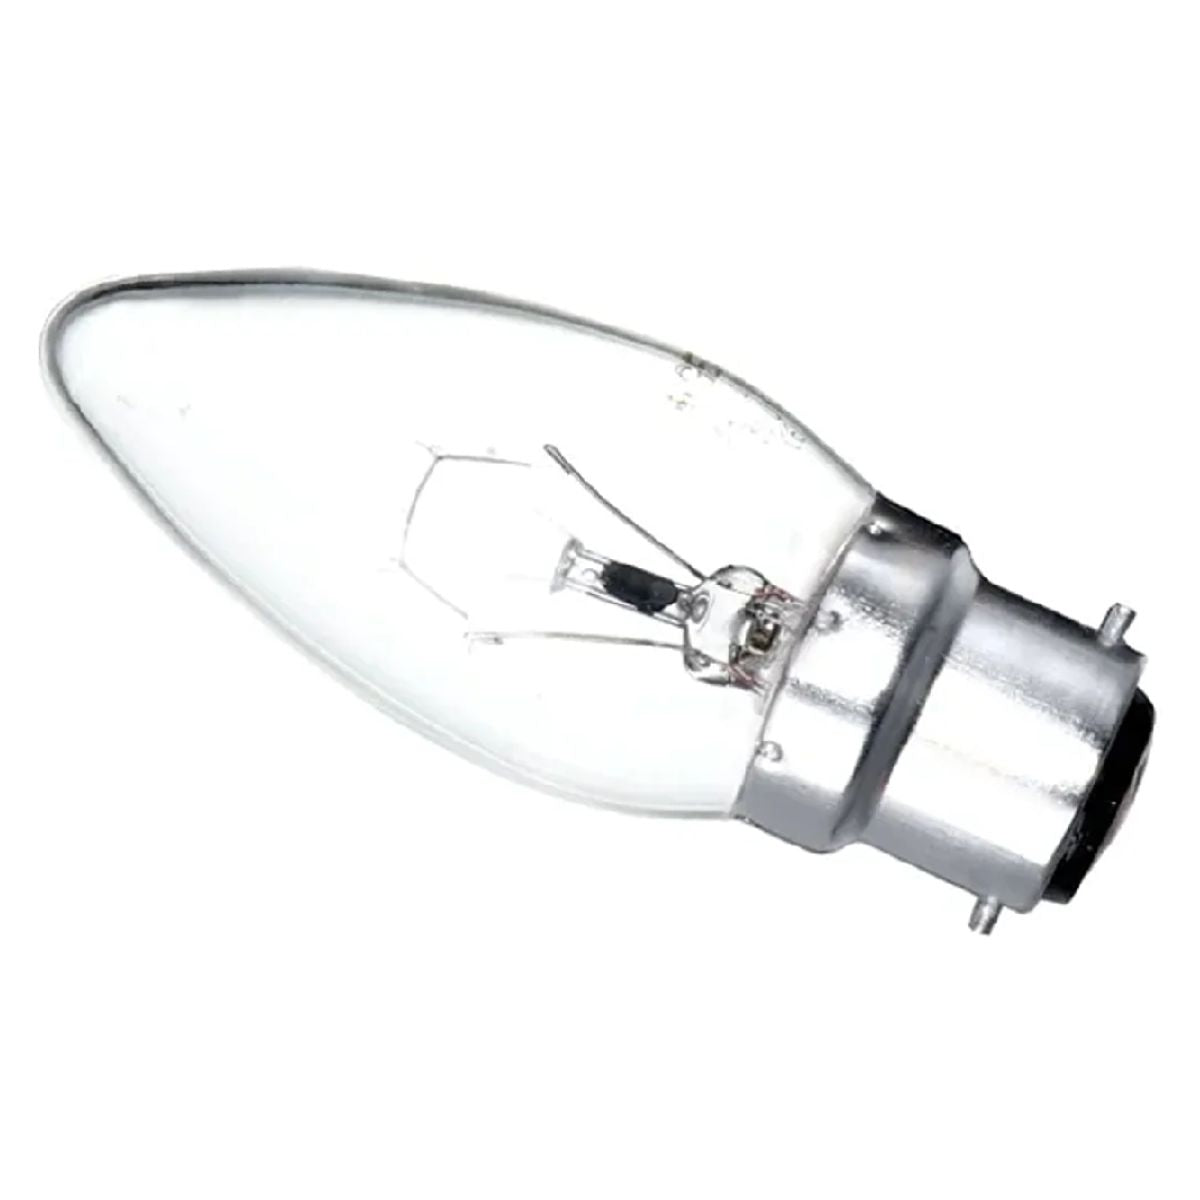 General Electric - Candle Bayonet Light Bulb - 25W incandescent bulb against a white background.